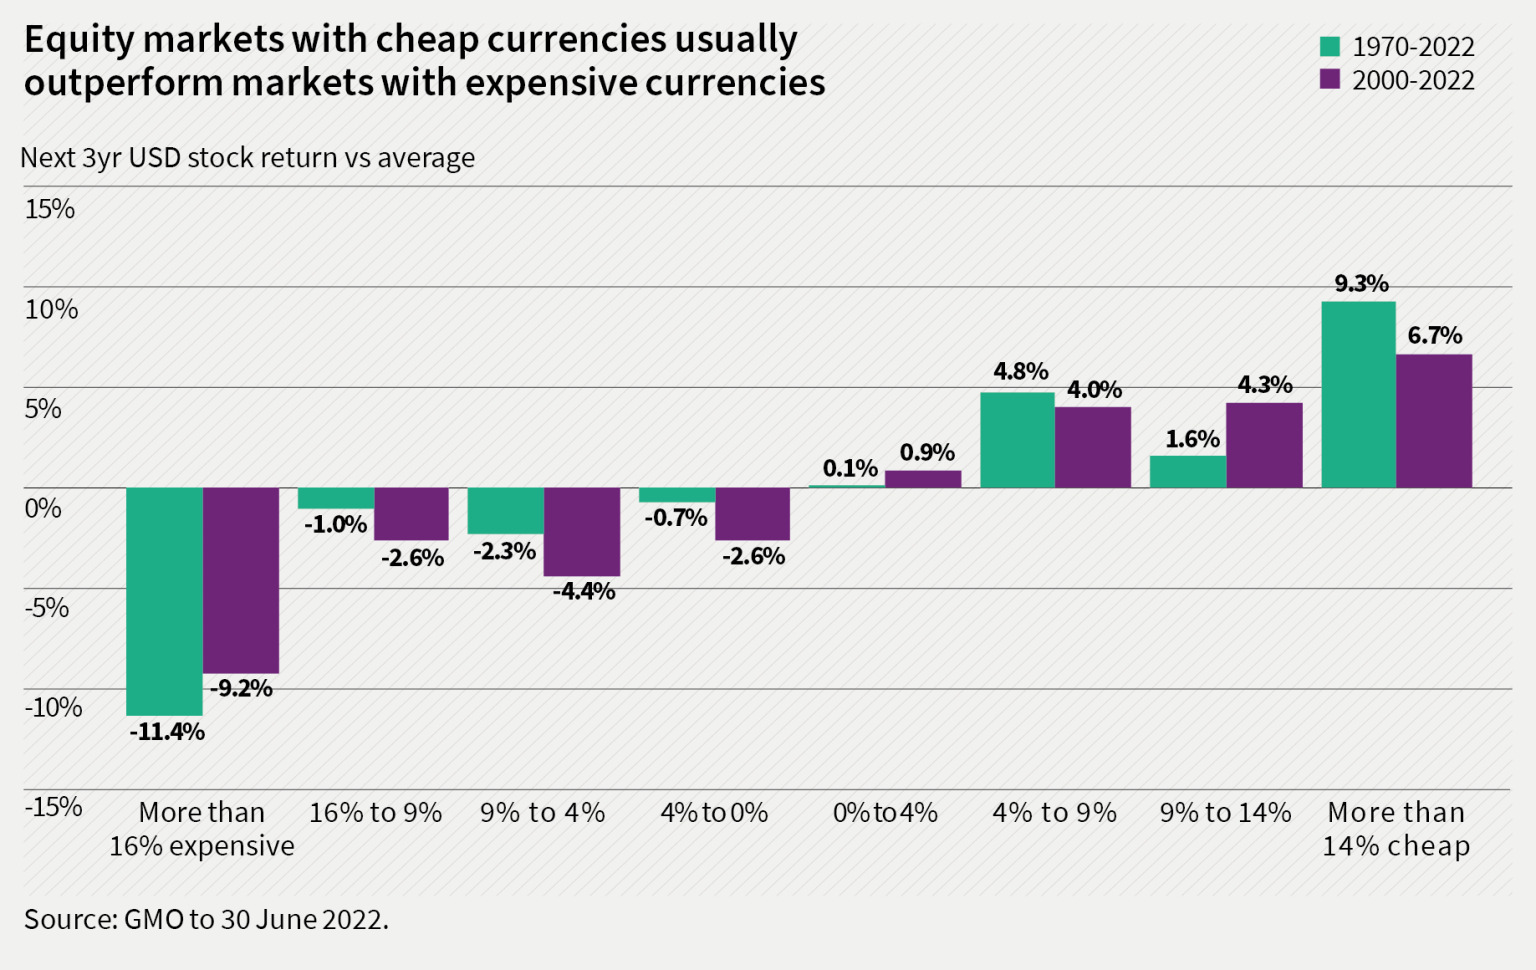 Equity markets with cheap currencies usually outperform markets with expensive currencies